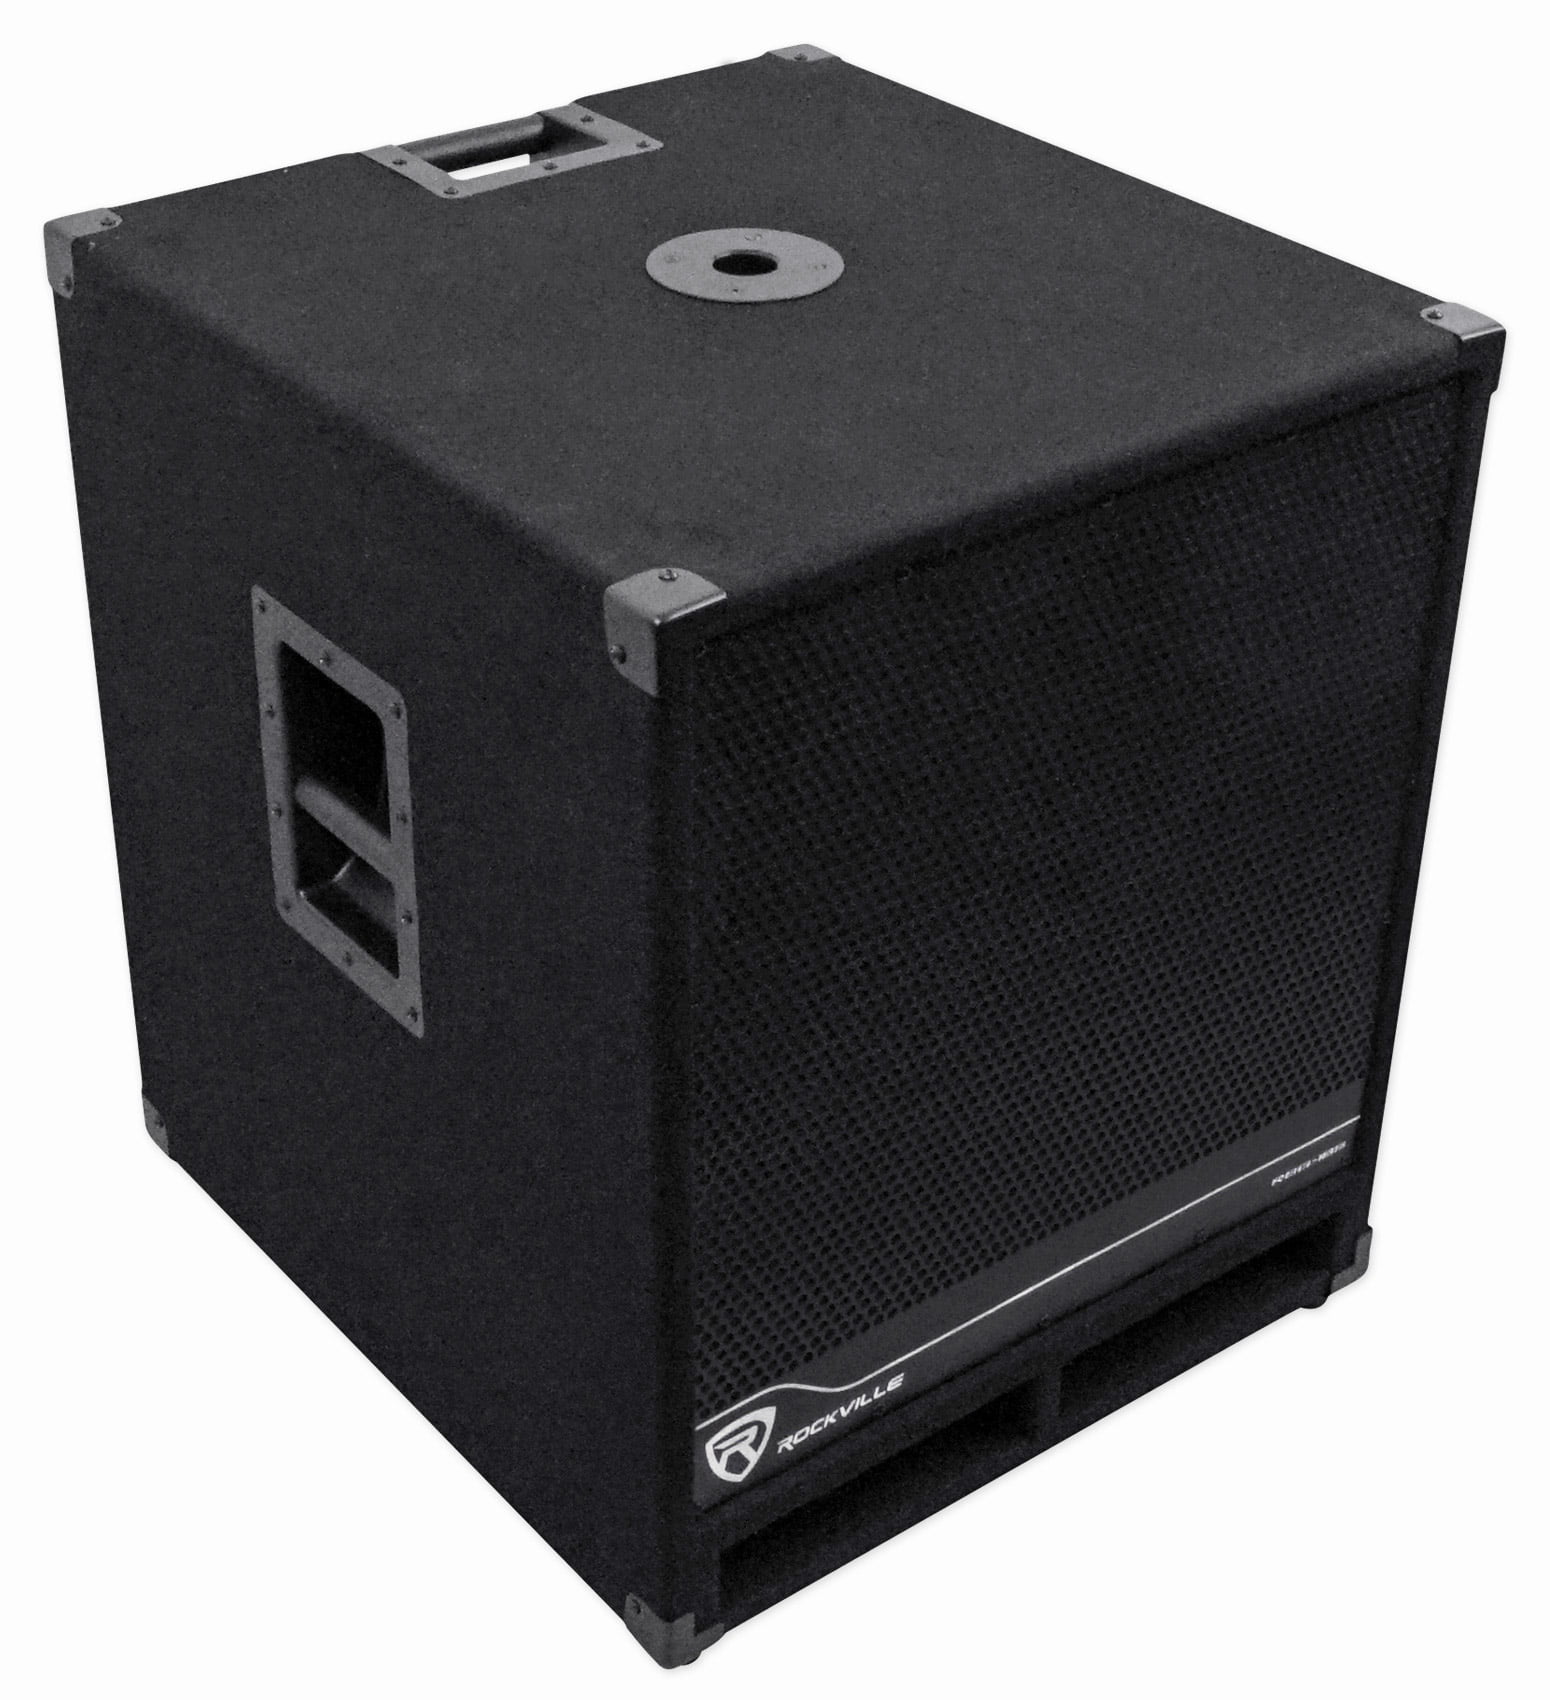 Rockville RBG18S 18" Powered Subwoofer with DSP